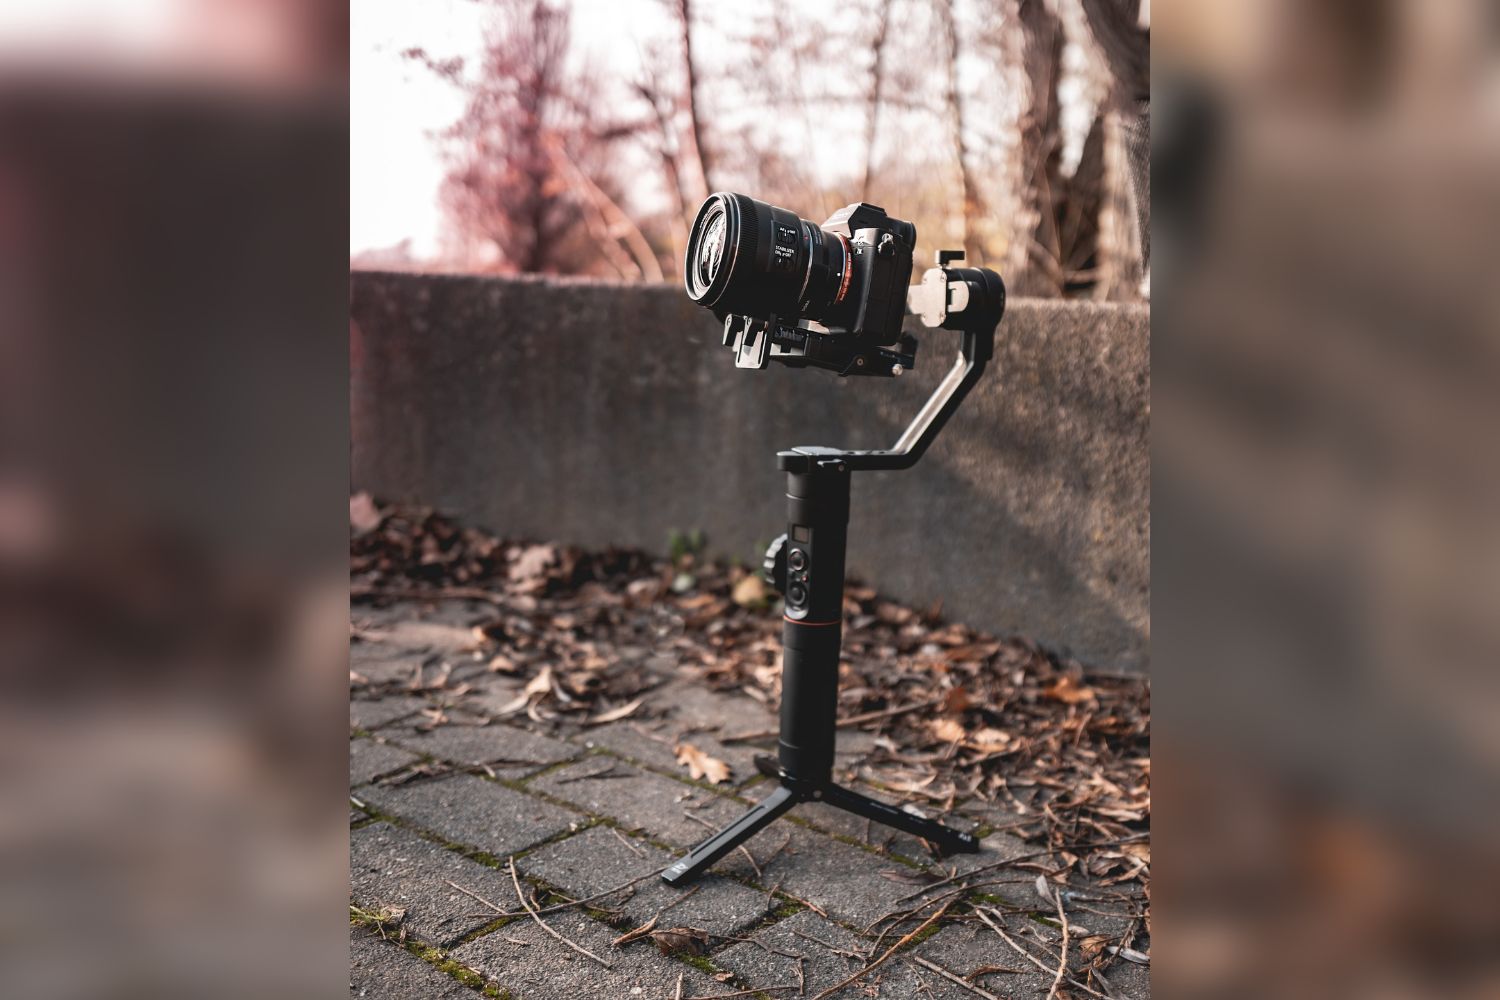 camera on gimbal places in the outside